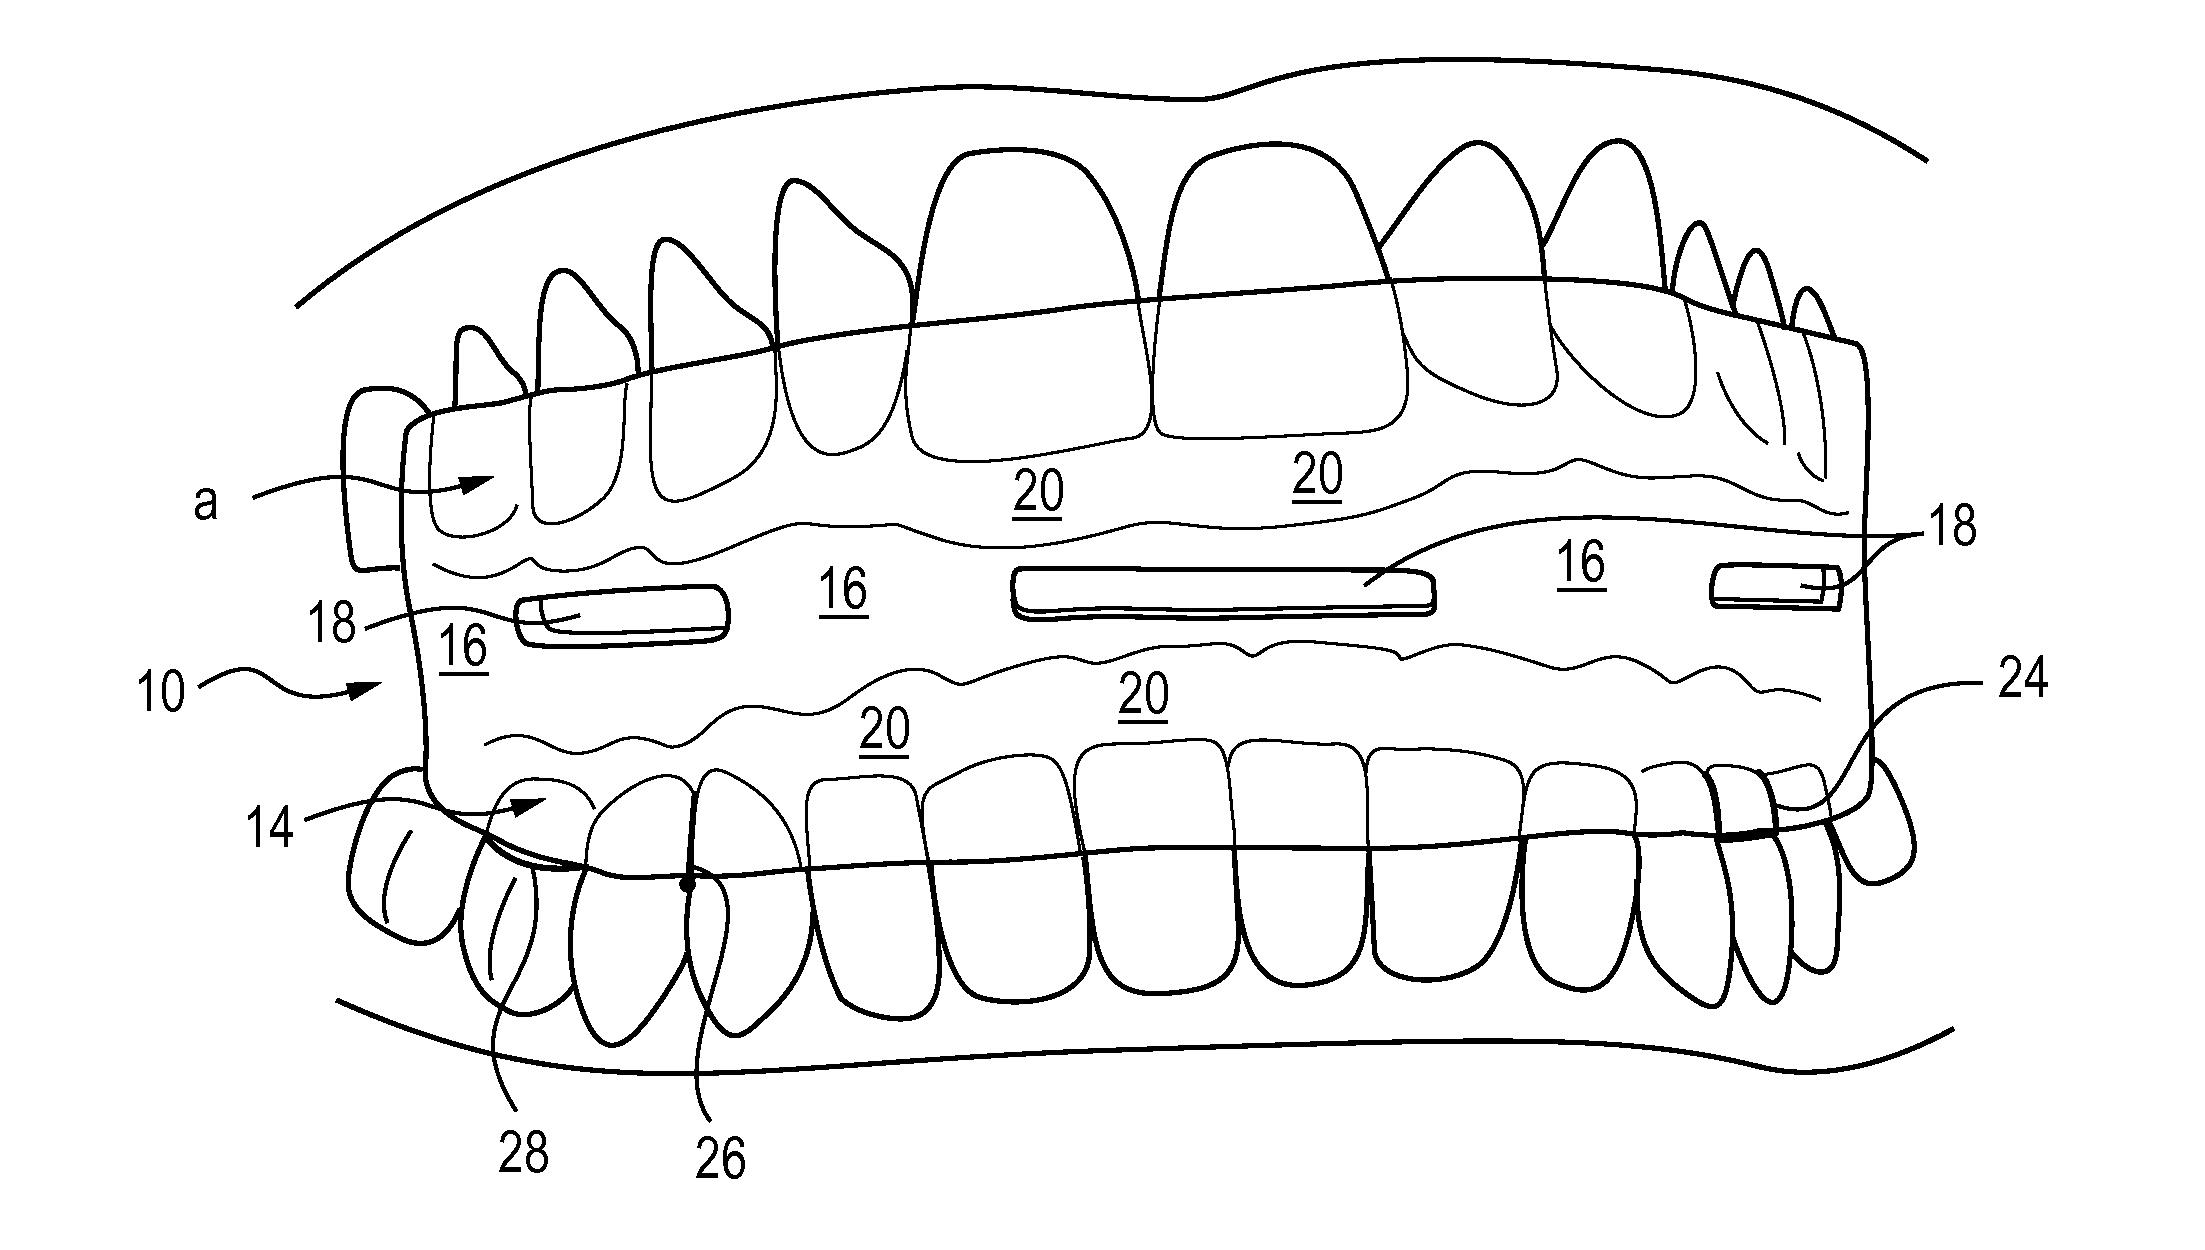 Apparatus and method for treatment of sleep apnea and snoring